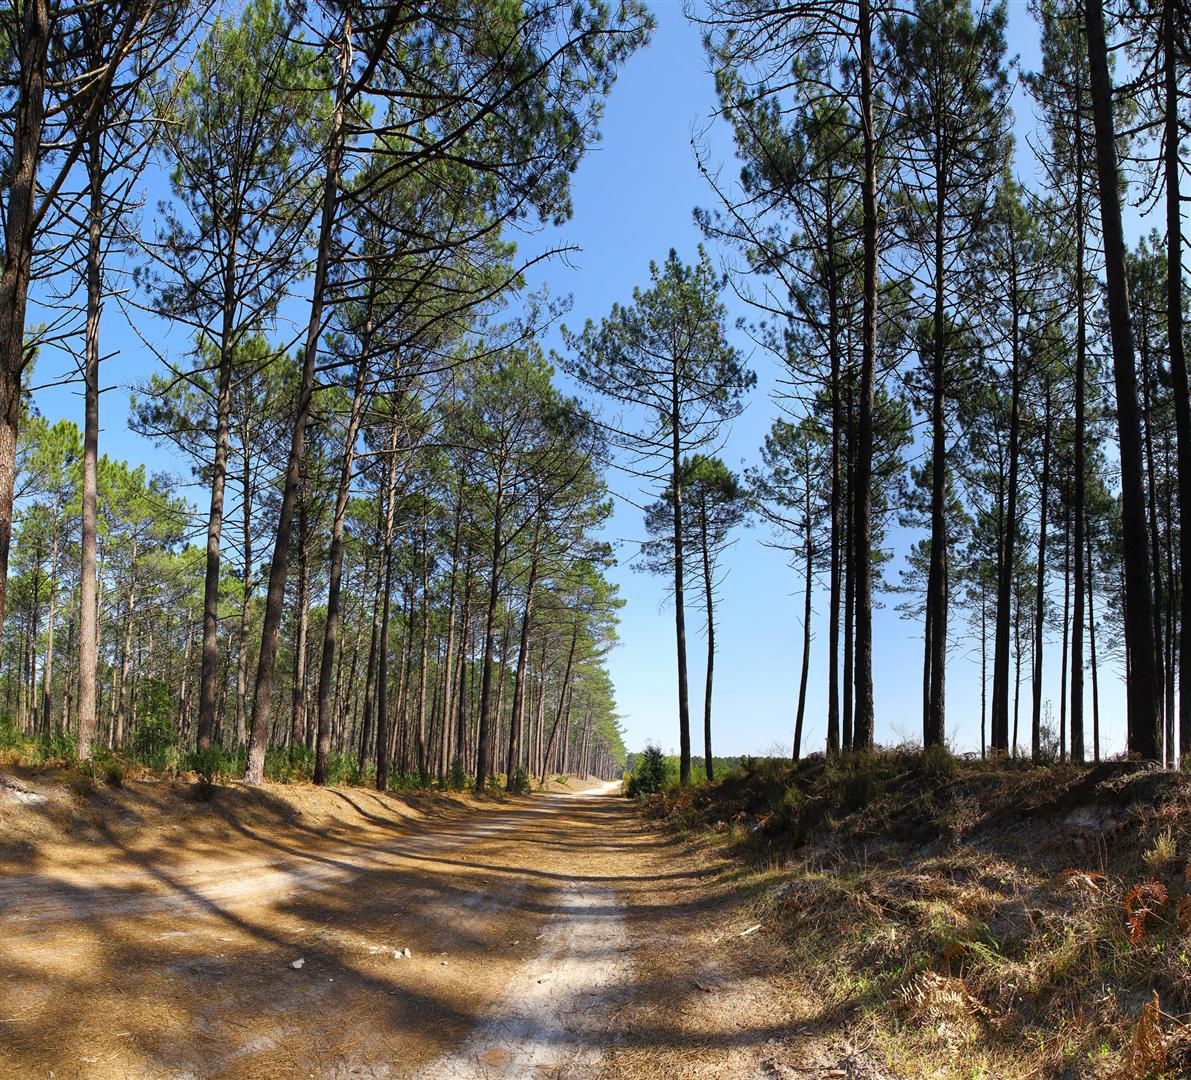 Dirt Road in Pine Tree Forest